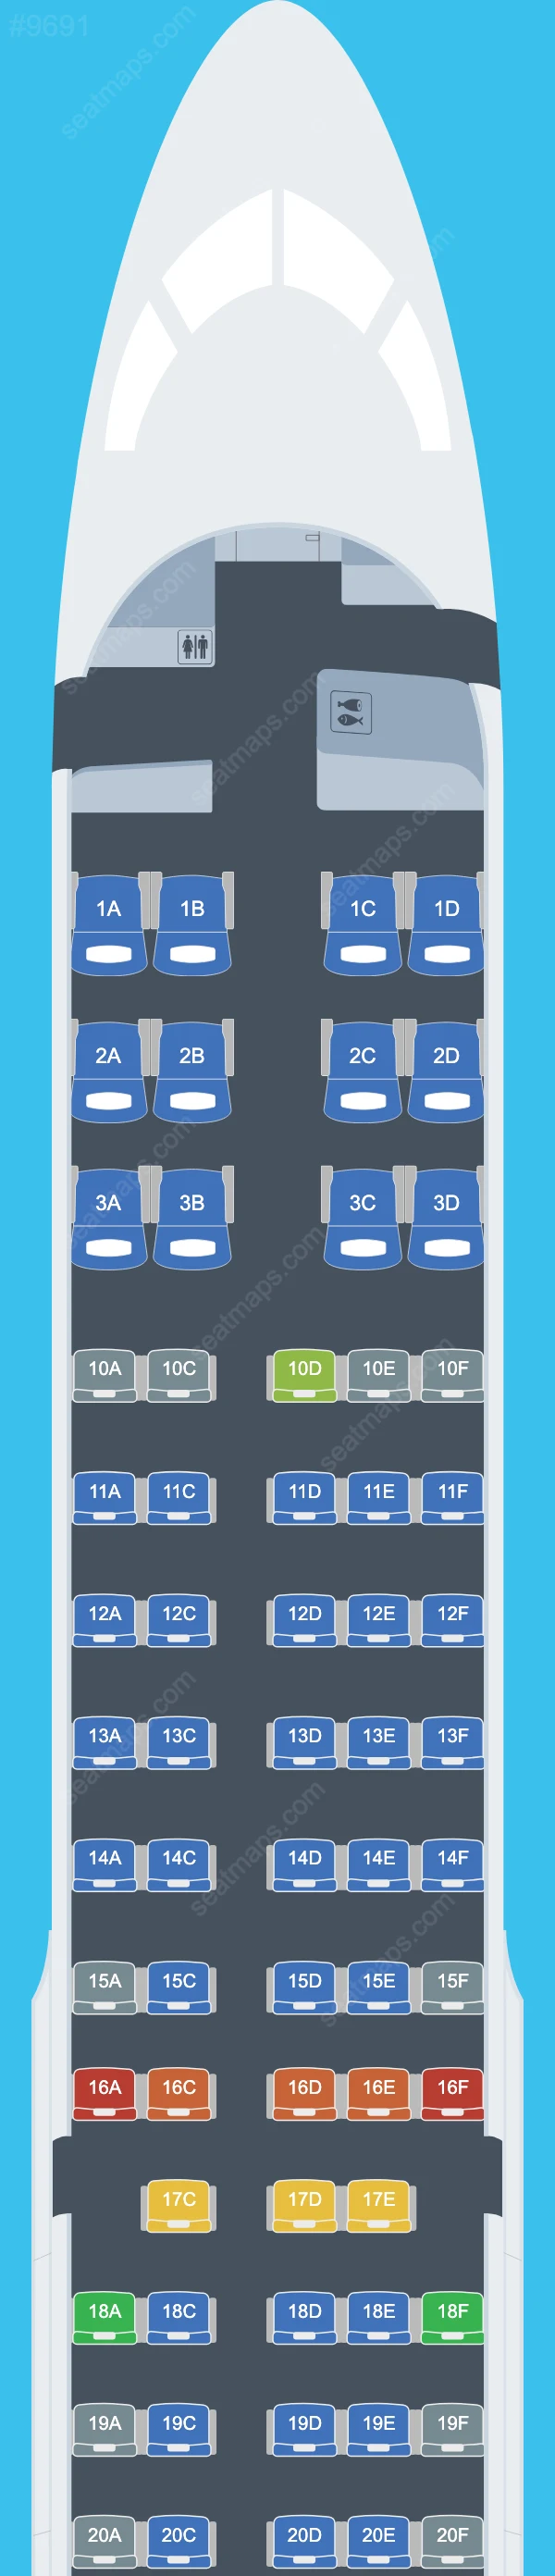 Delta Airbus A220 Seat Maps A220-300 V.1